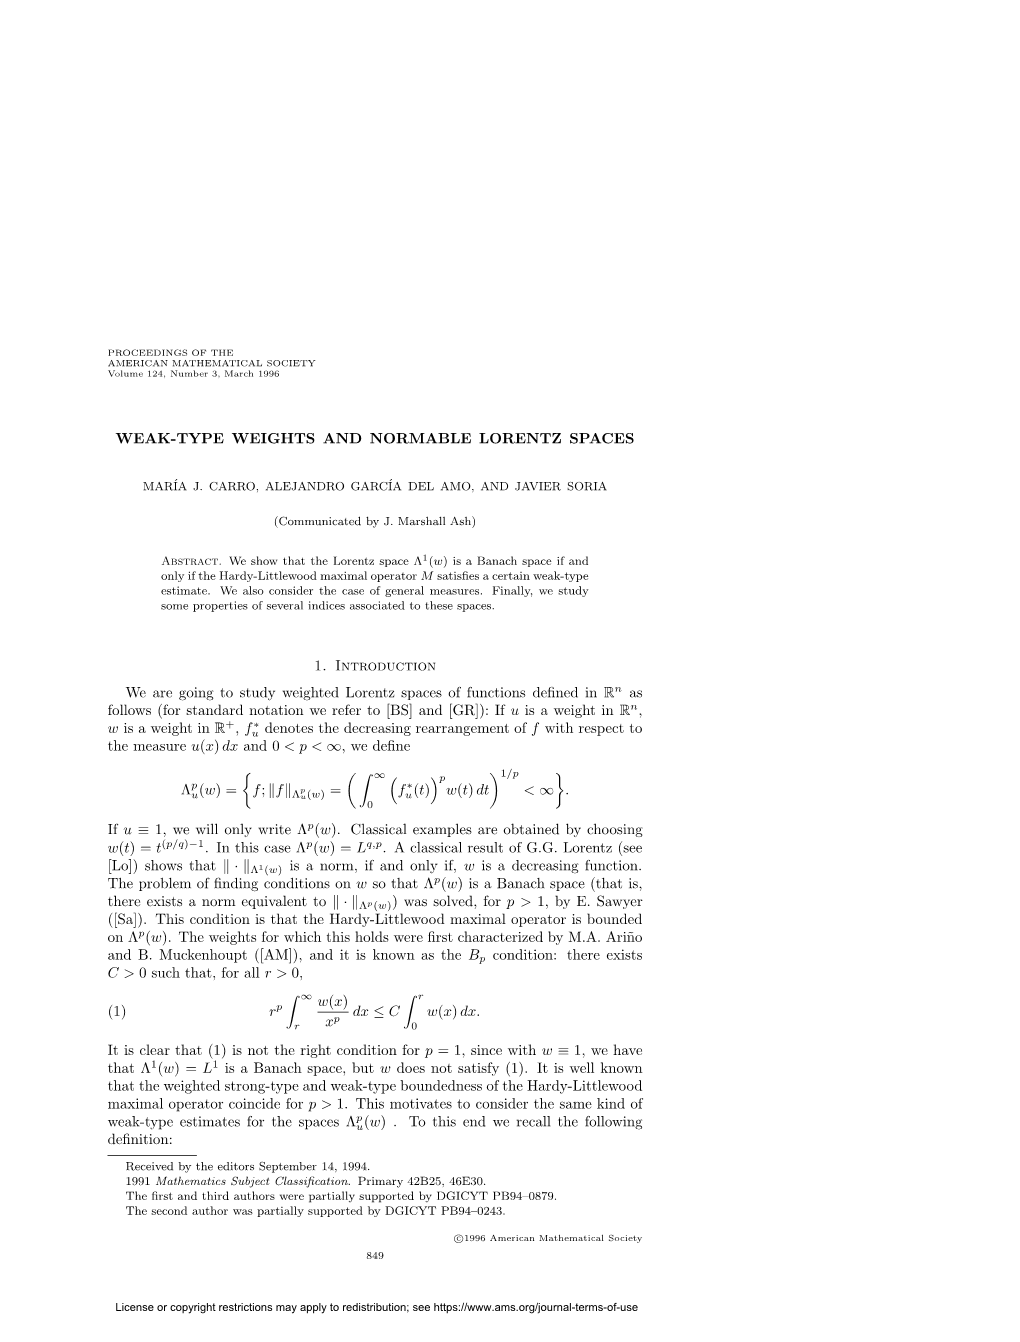 Weak-Type Weights and Normable Lorentz Spaces 1